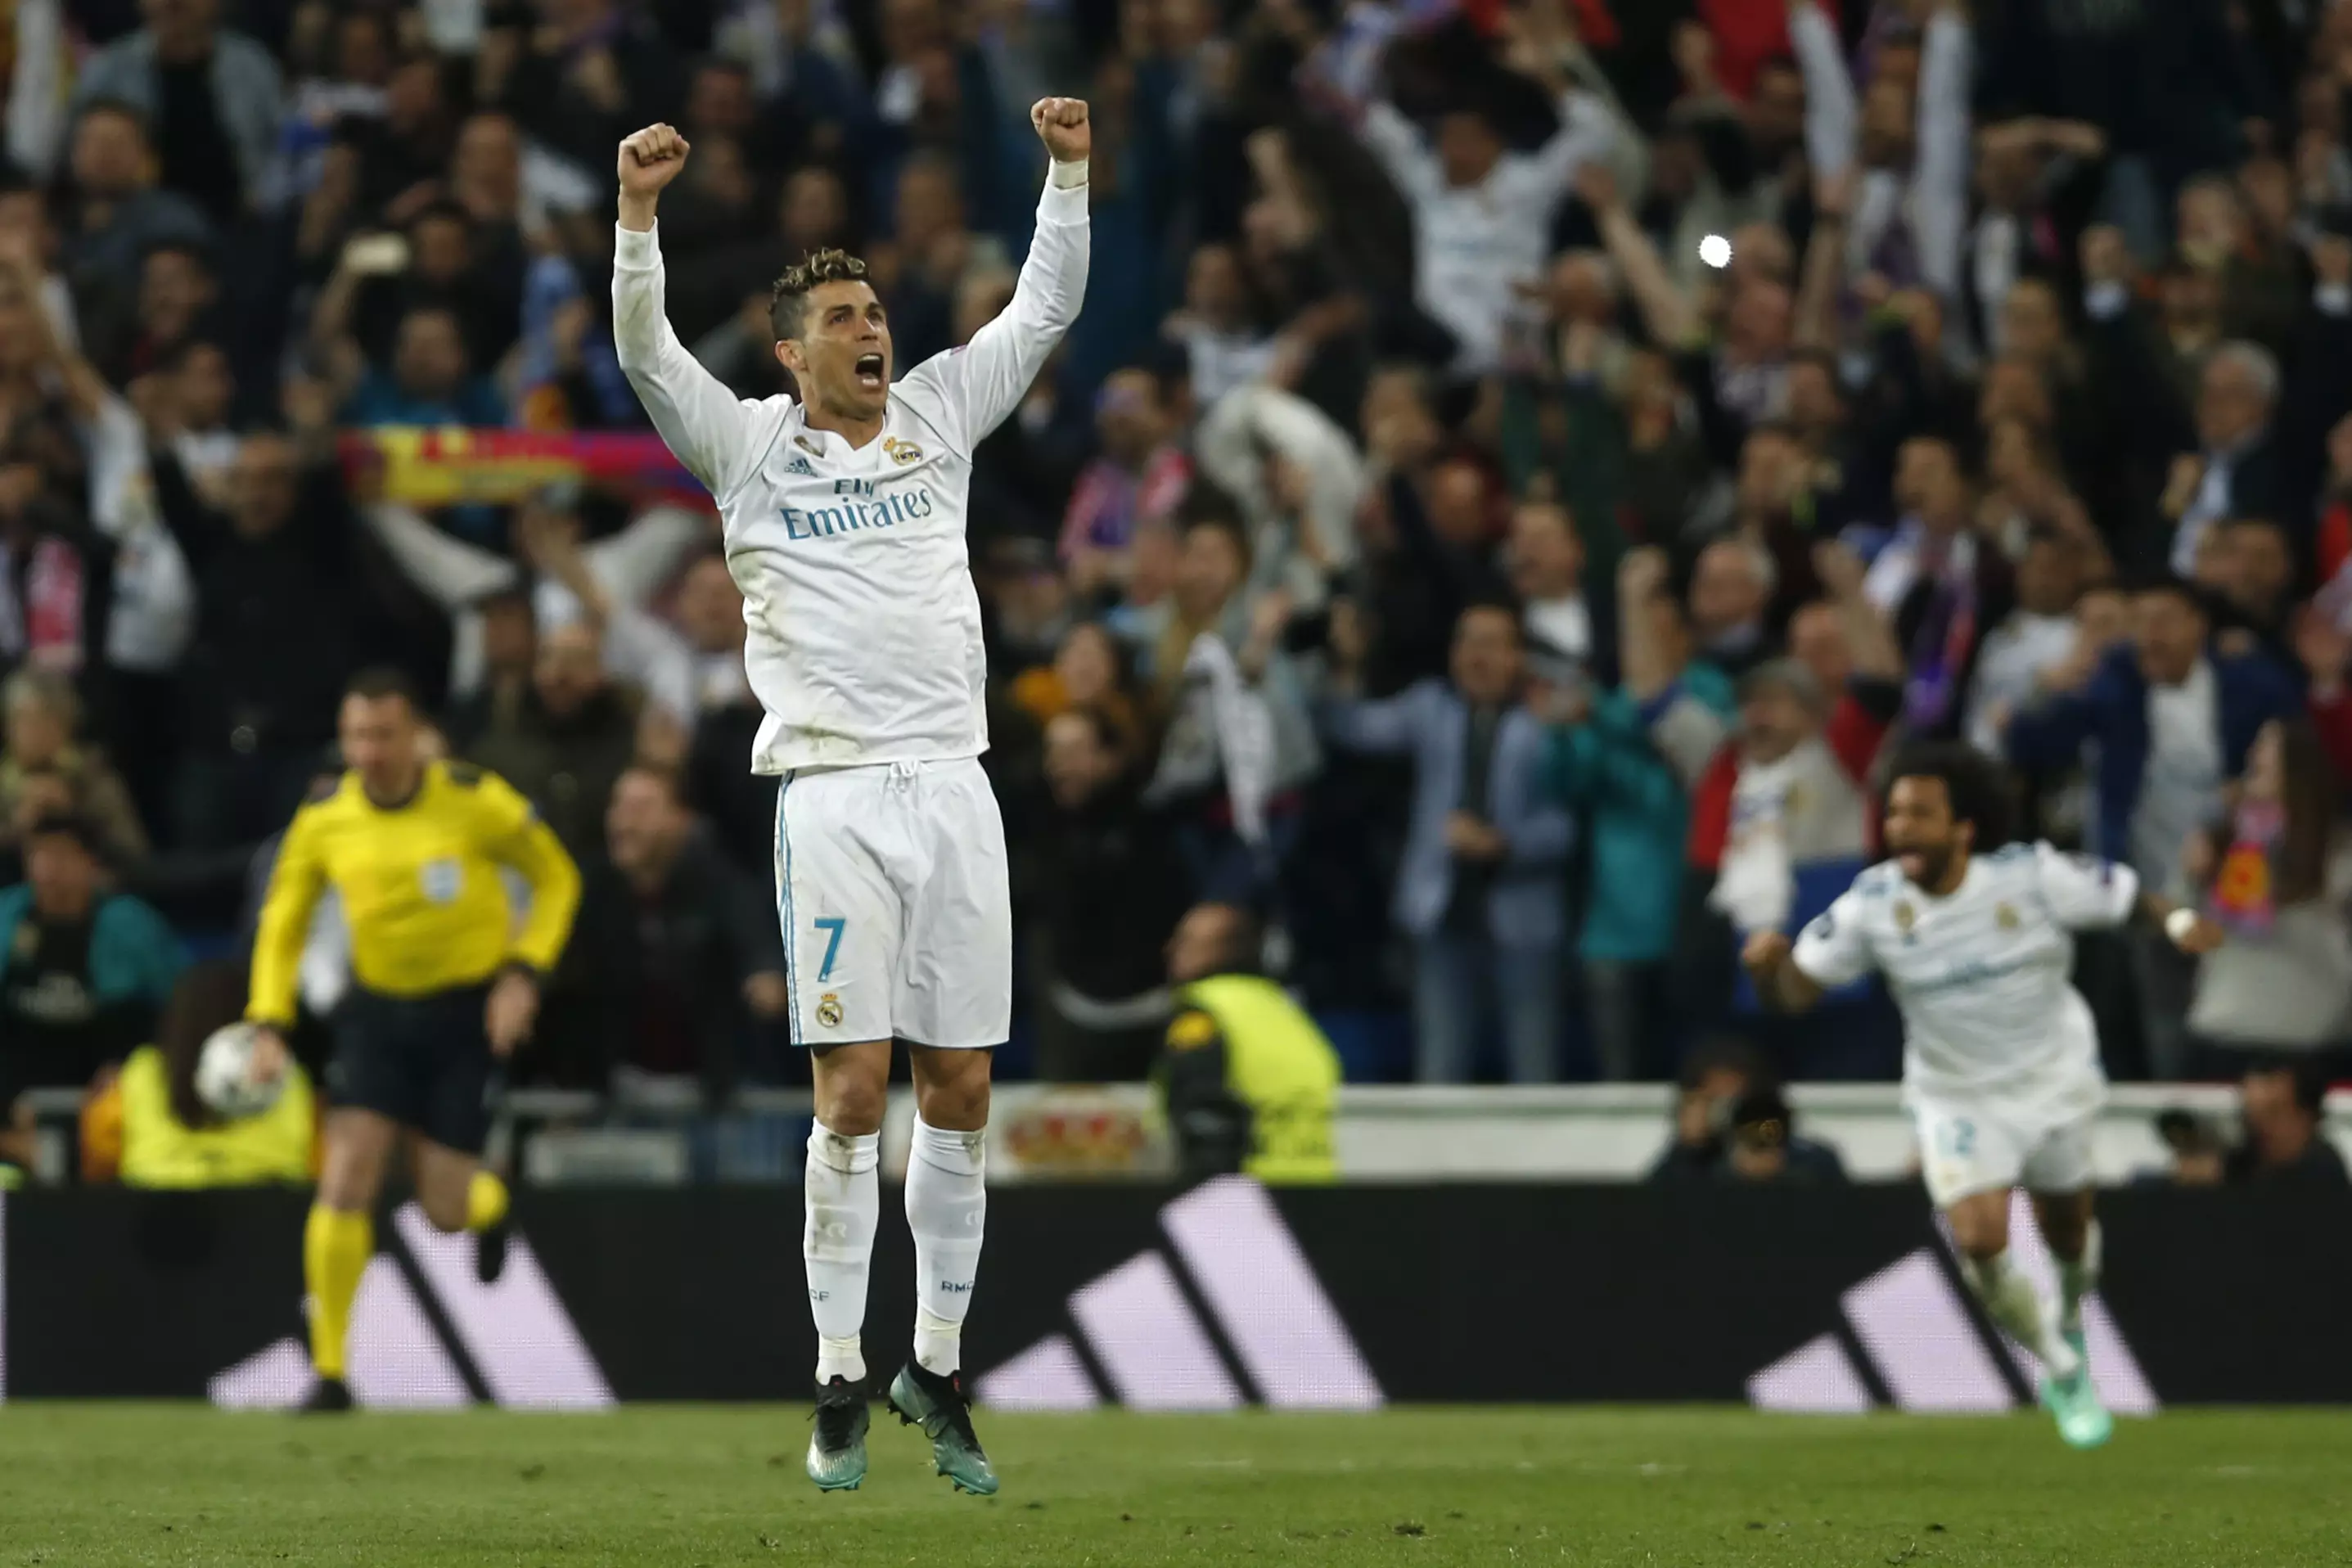 Ronaldo celebrates securing a spot in the final. Image: PA